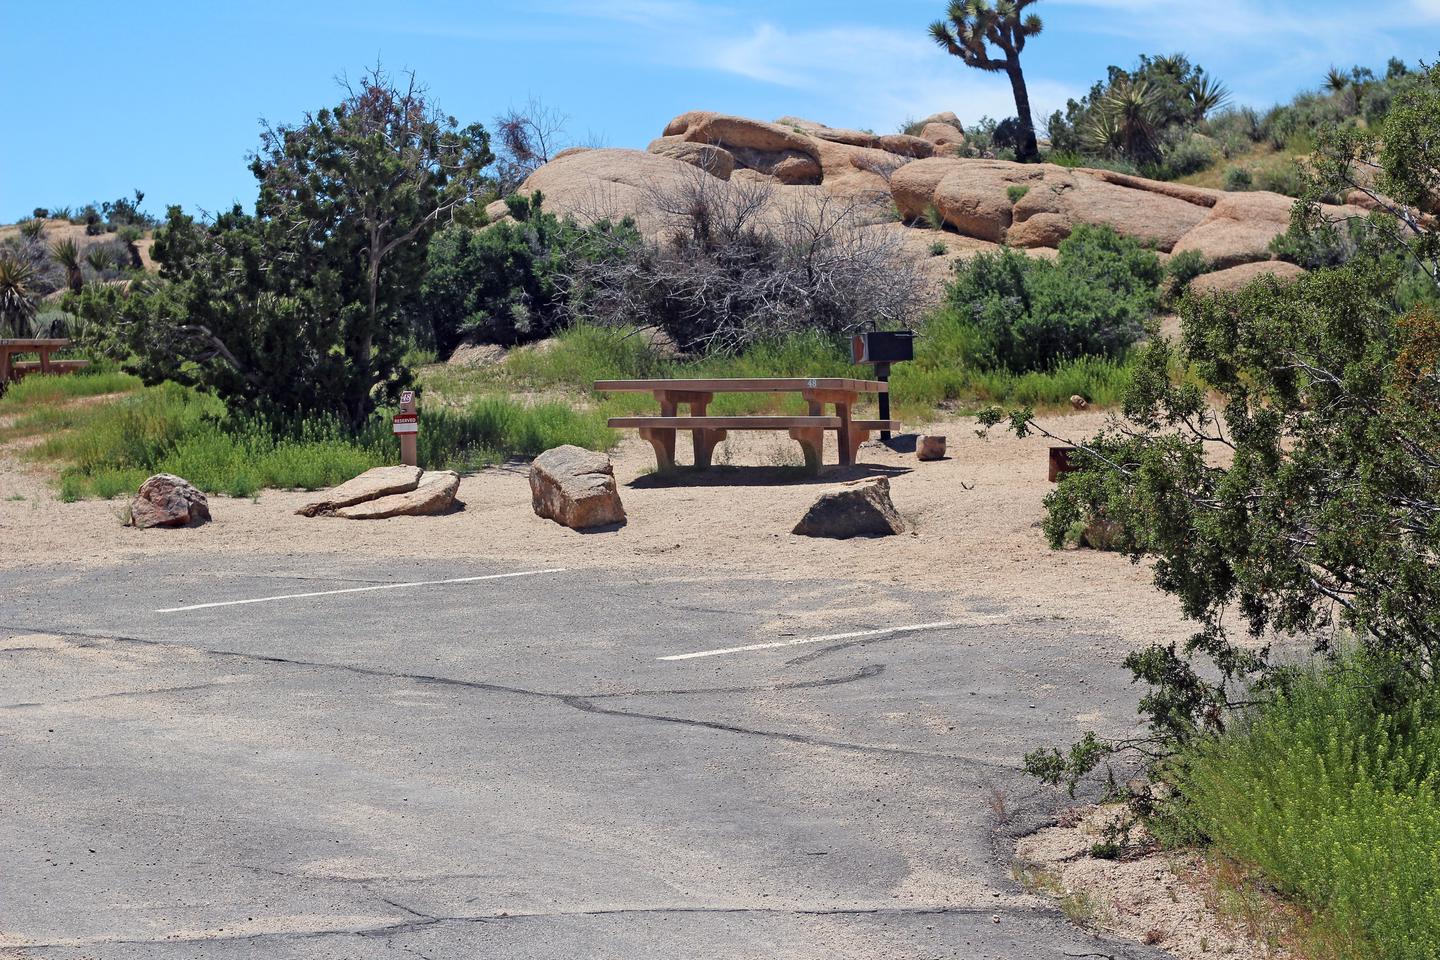 Parking for campsite. Picnic table surrounded by boulders and green plants.Parking and campsite.